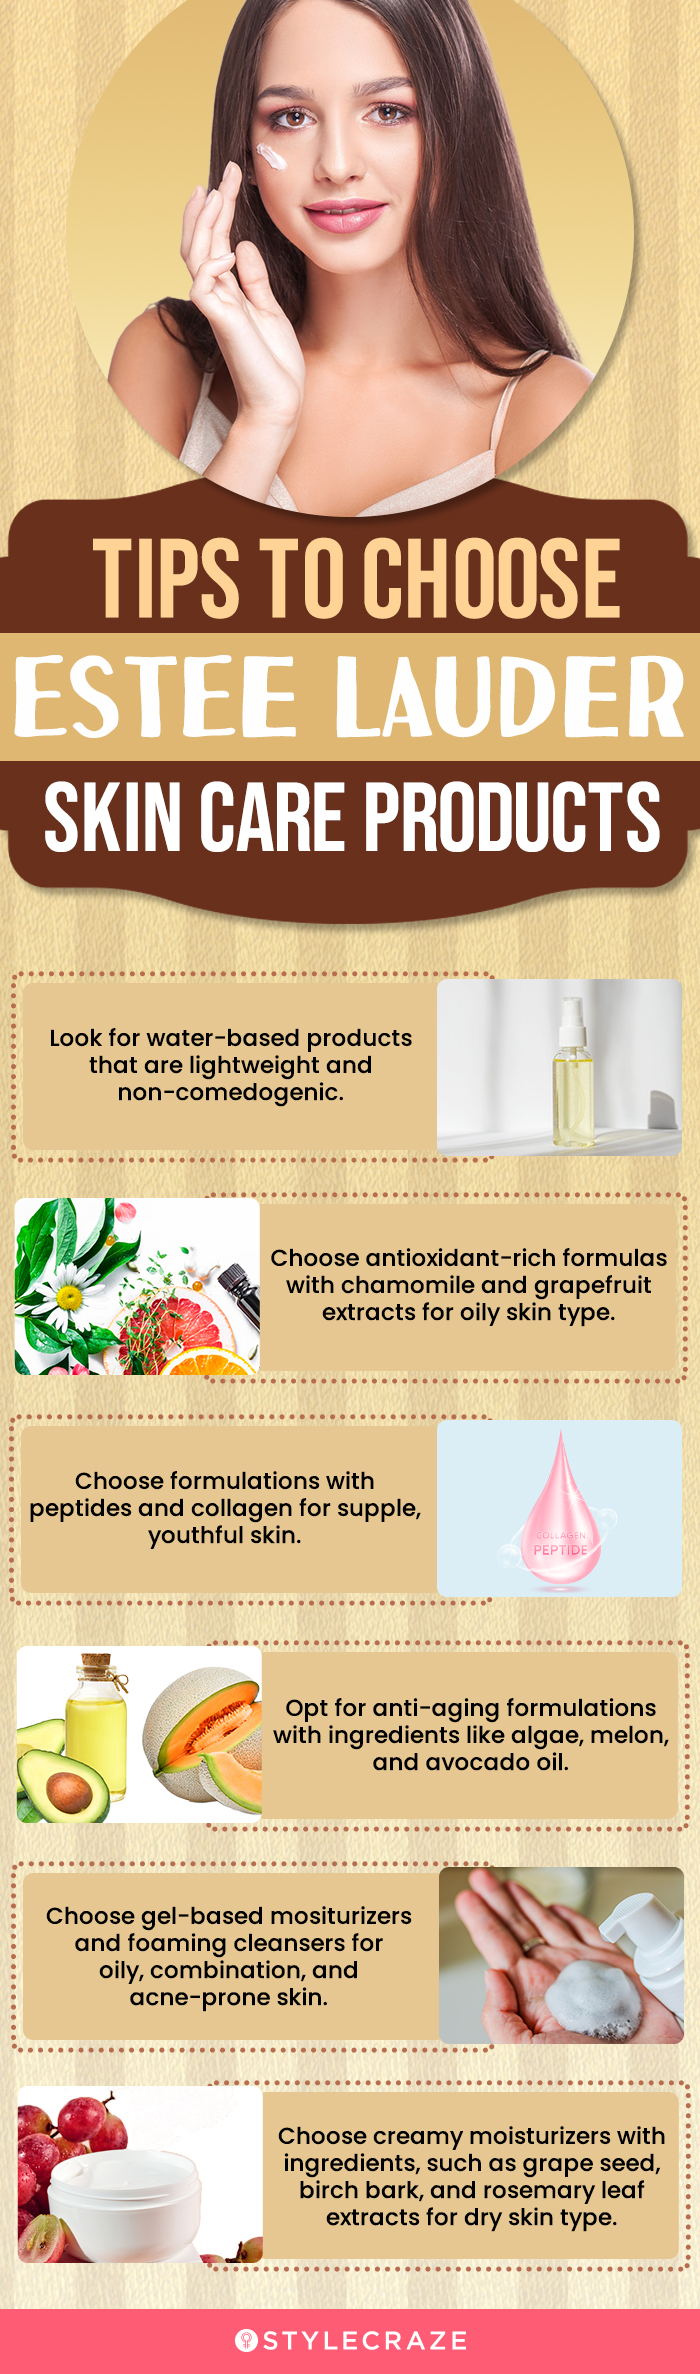 Tips To Choose Estee Lauder Skin Care Products (infographic)